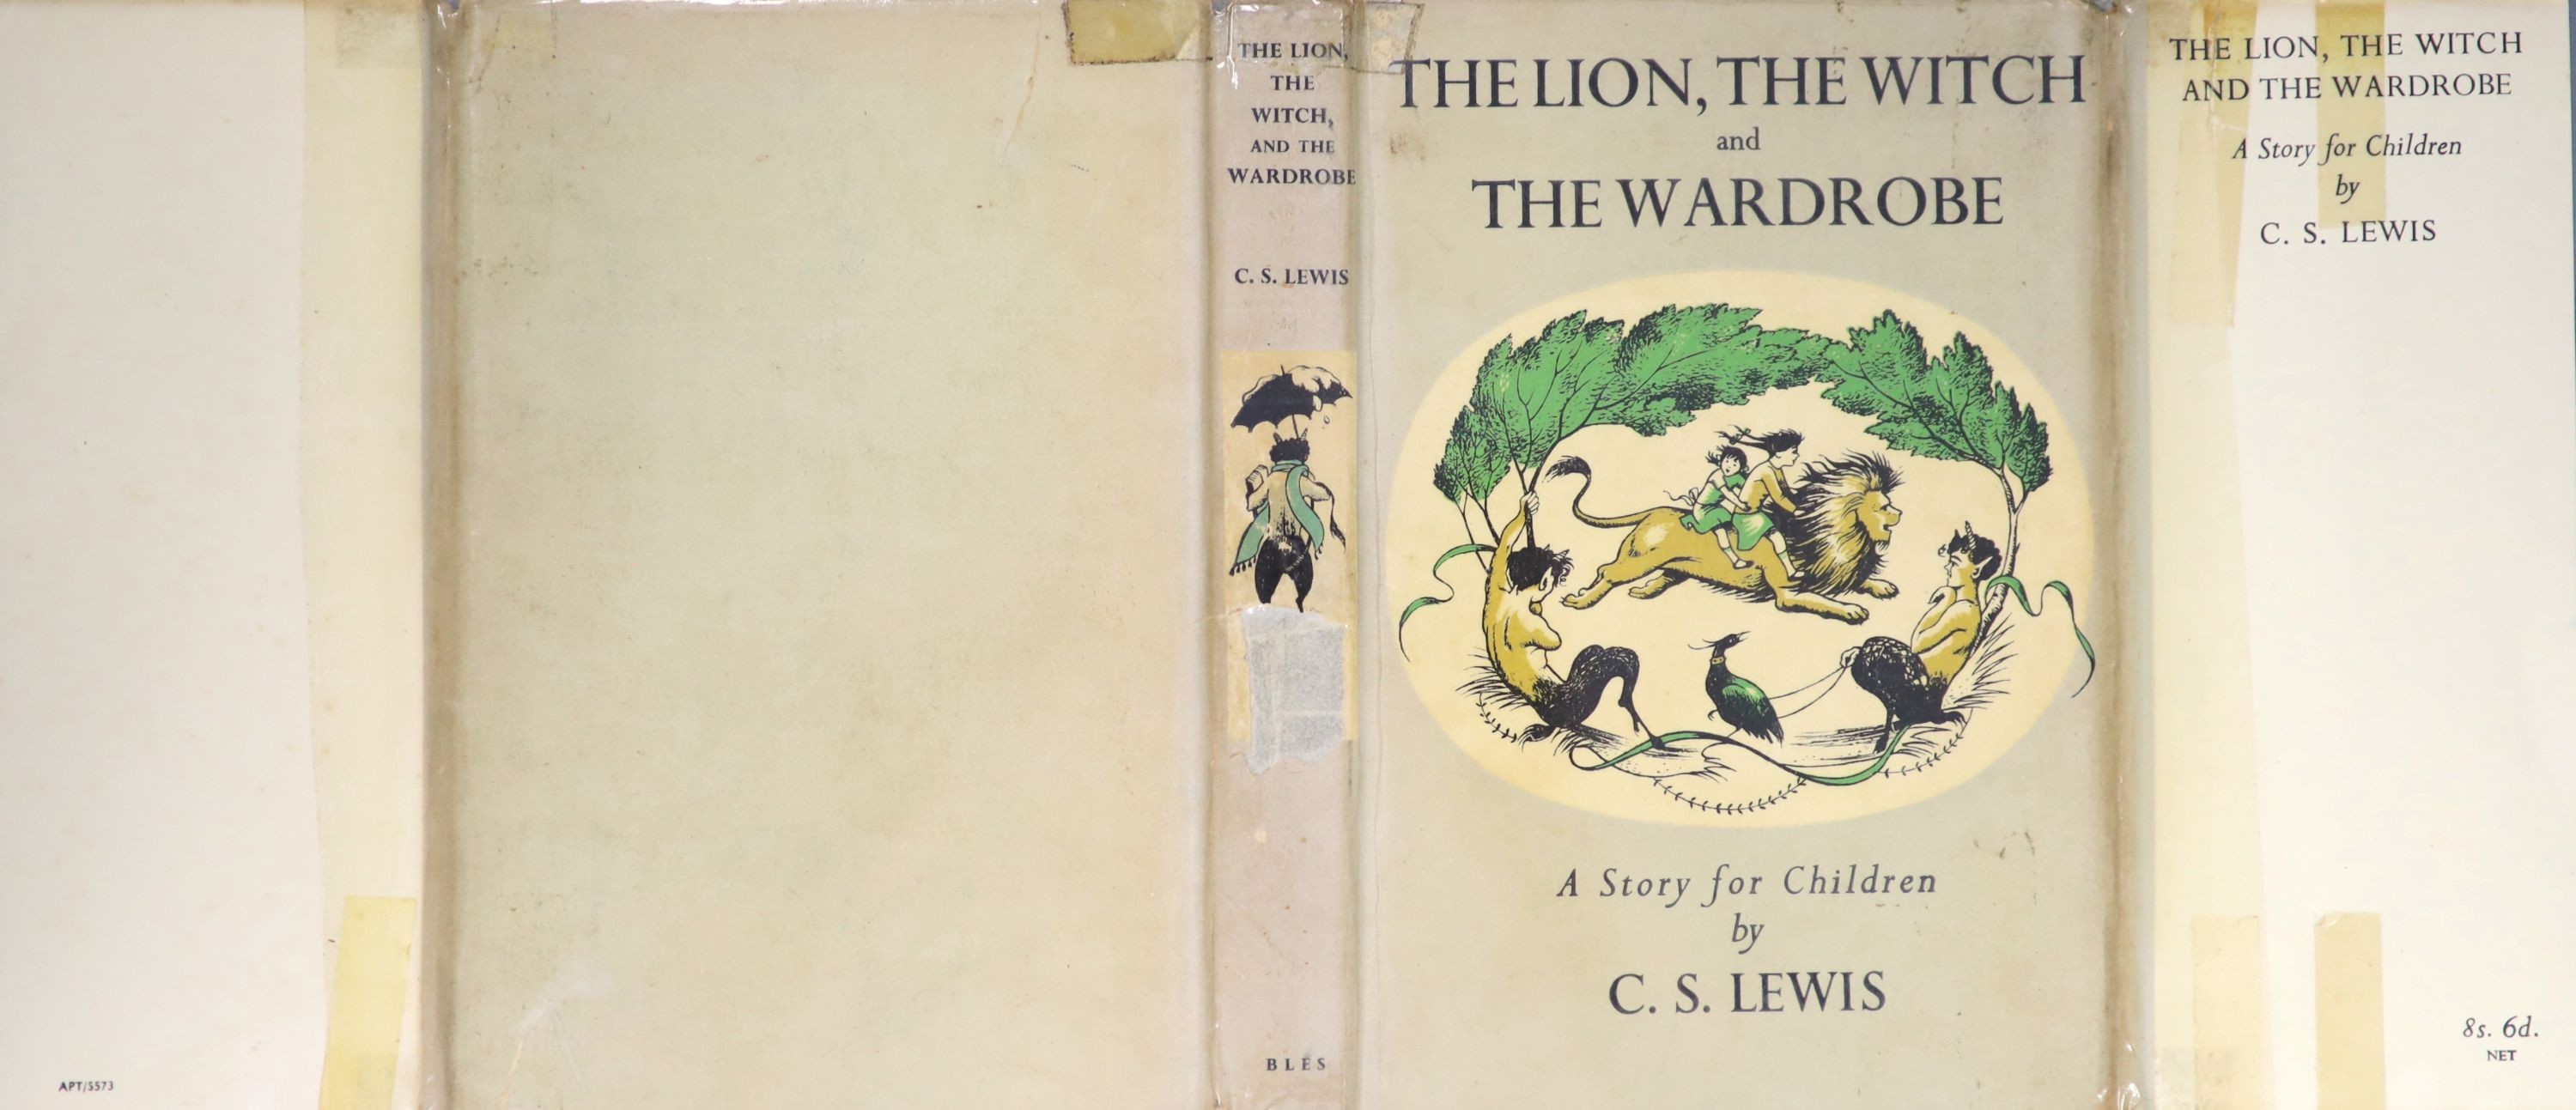 Lewis, Clive Staples - The Lion, the Witch and the Wardrobe,1st edition , 8vo, illustrated by Pauline Baynes, including a coloured frontis, original cloth with sunned spine, in unclipped, chipped, repaired d/j, Geoffrey